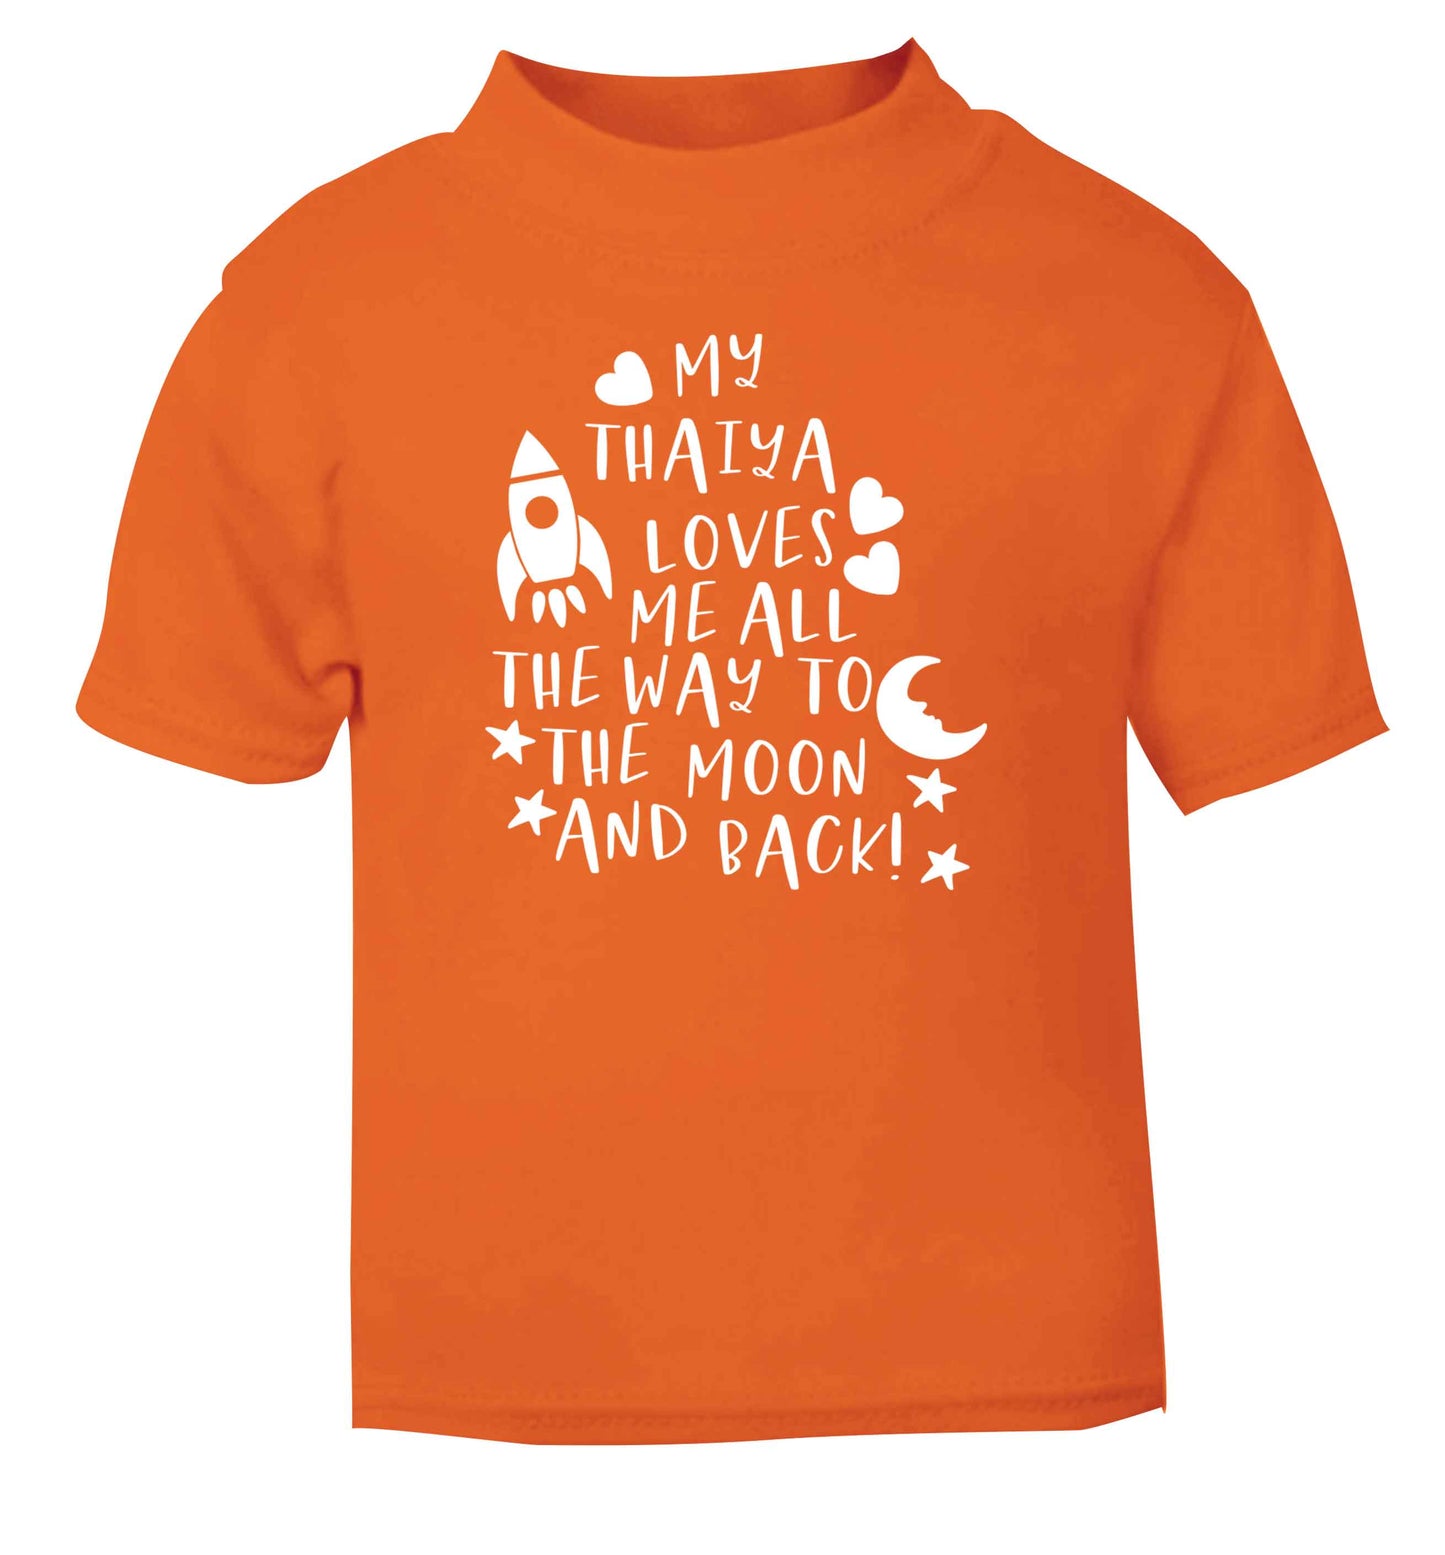 My thaiya loves me all the way to the moon and back orange Baby Toddler Tshirt 2 Years